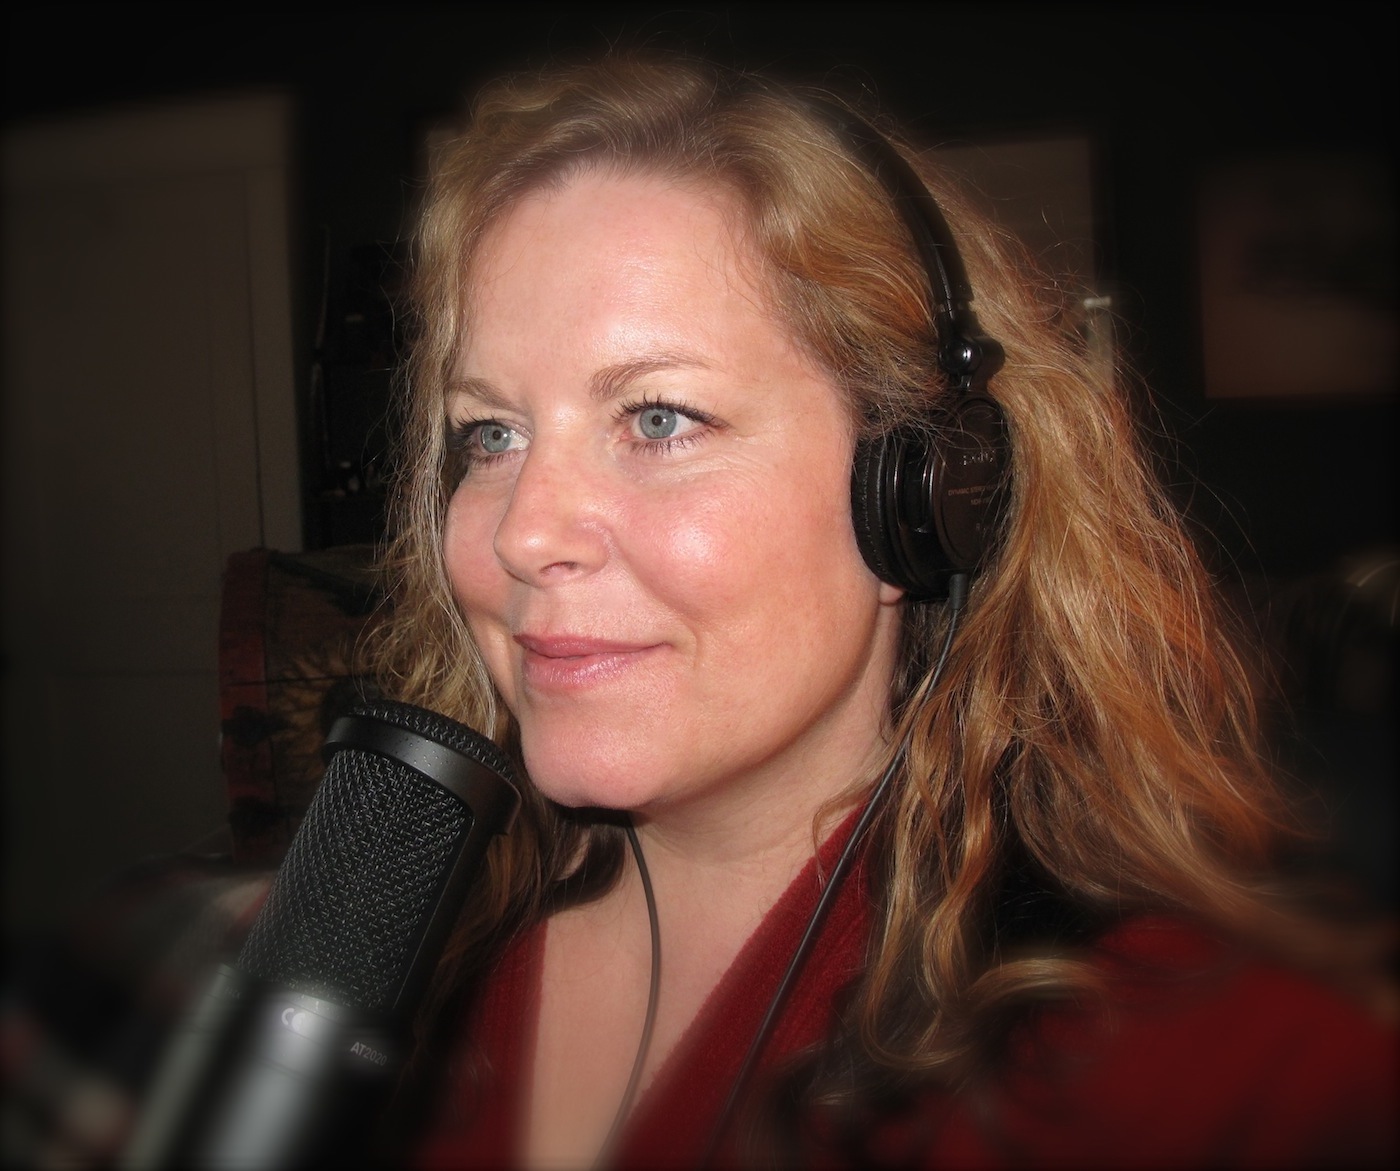 Need help with Podcasting or Media Services? Schedule a consultation with Shann Today